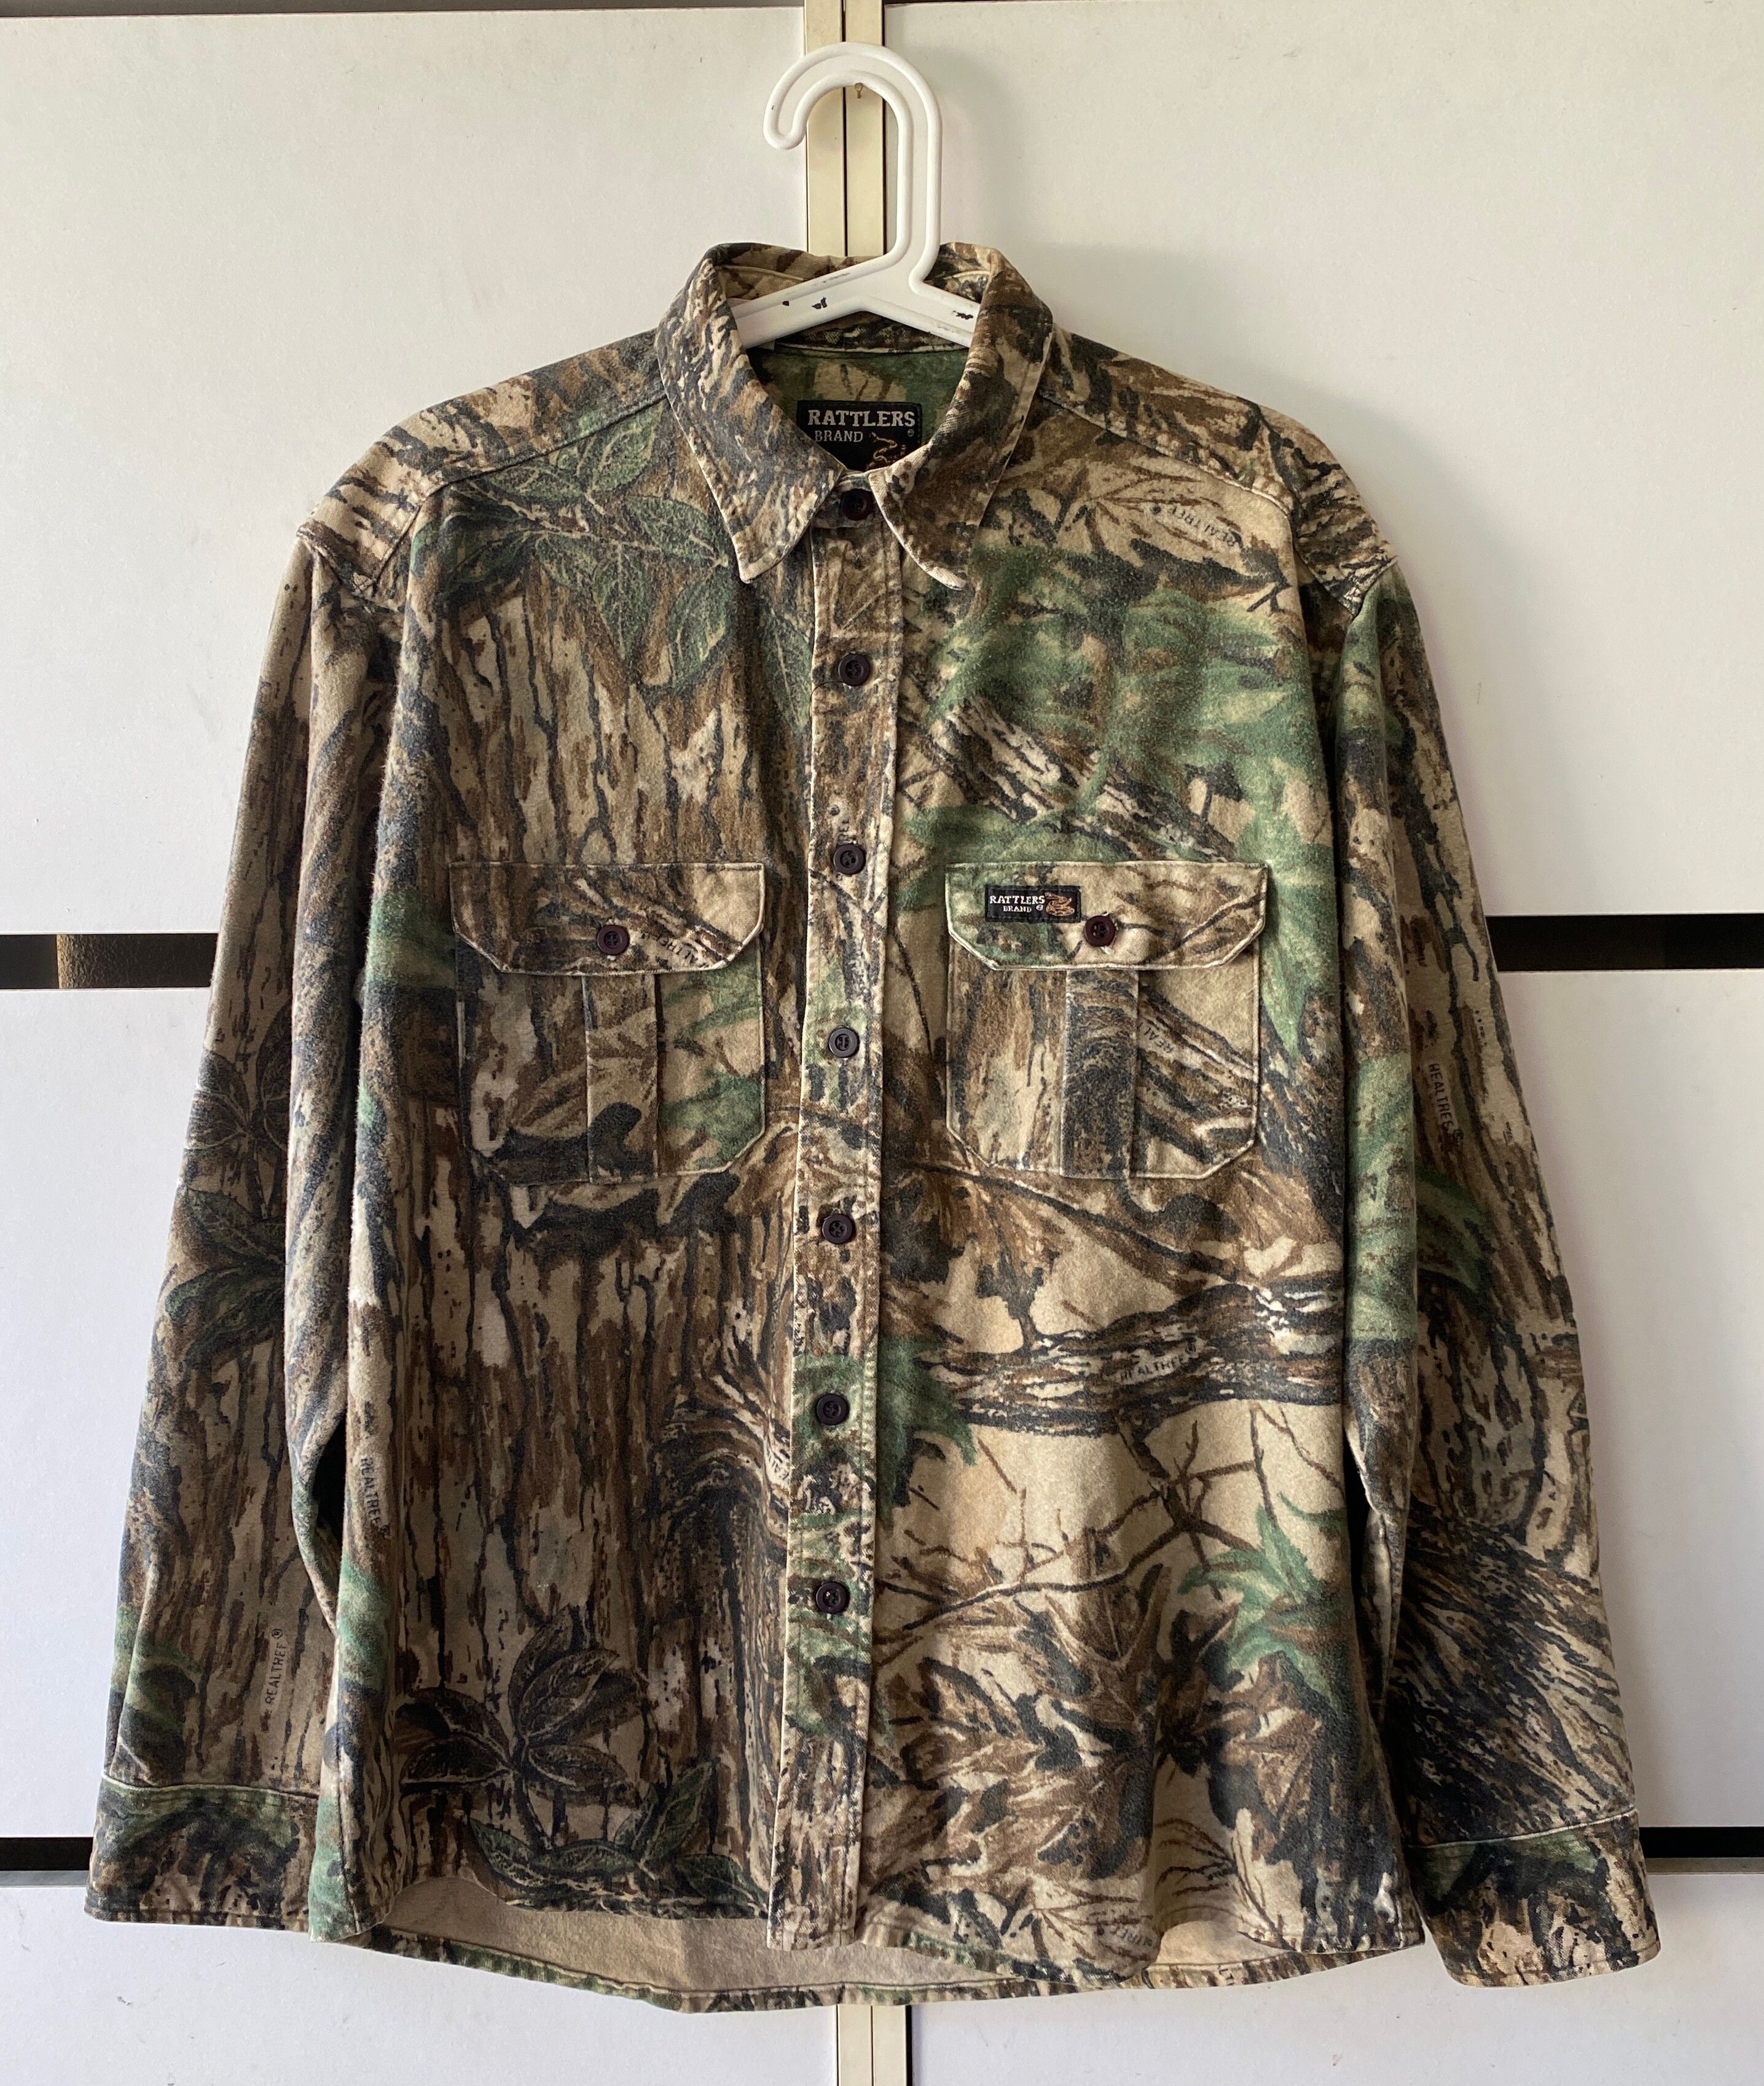 VTG Rattlers Brand Real Tree Made USA Button Hunting Shirt Camo Flannel 